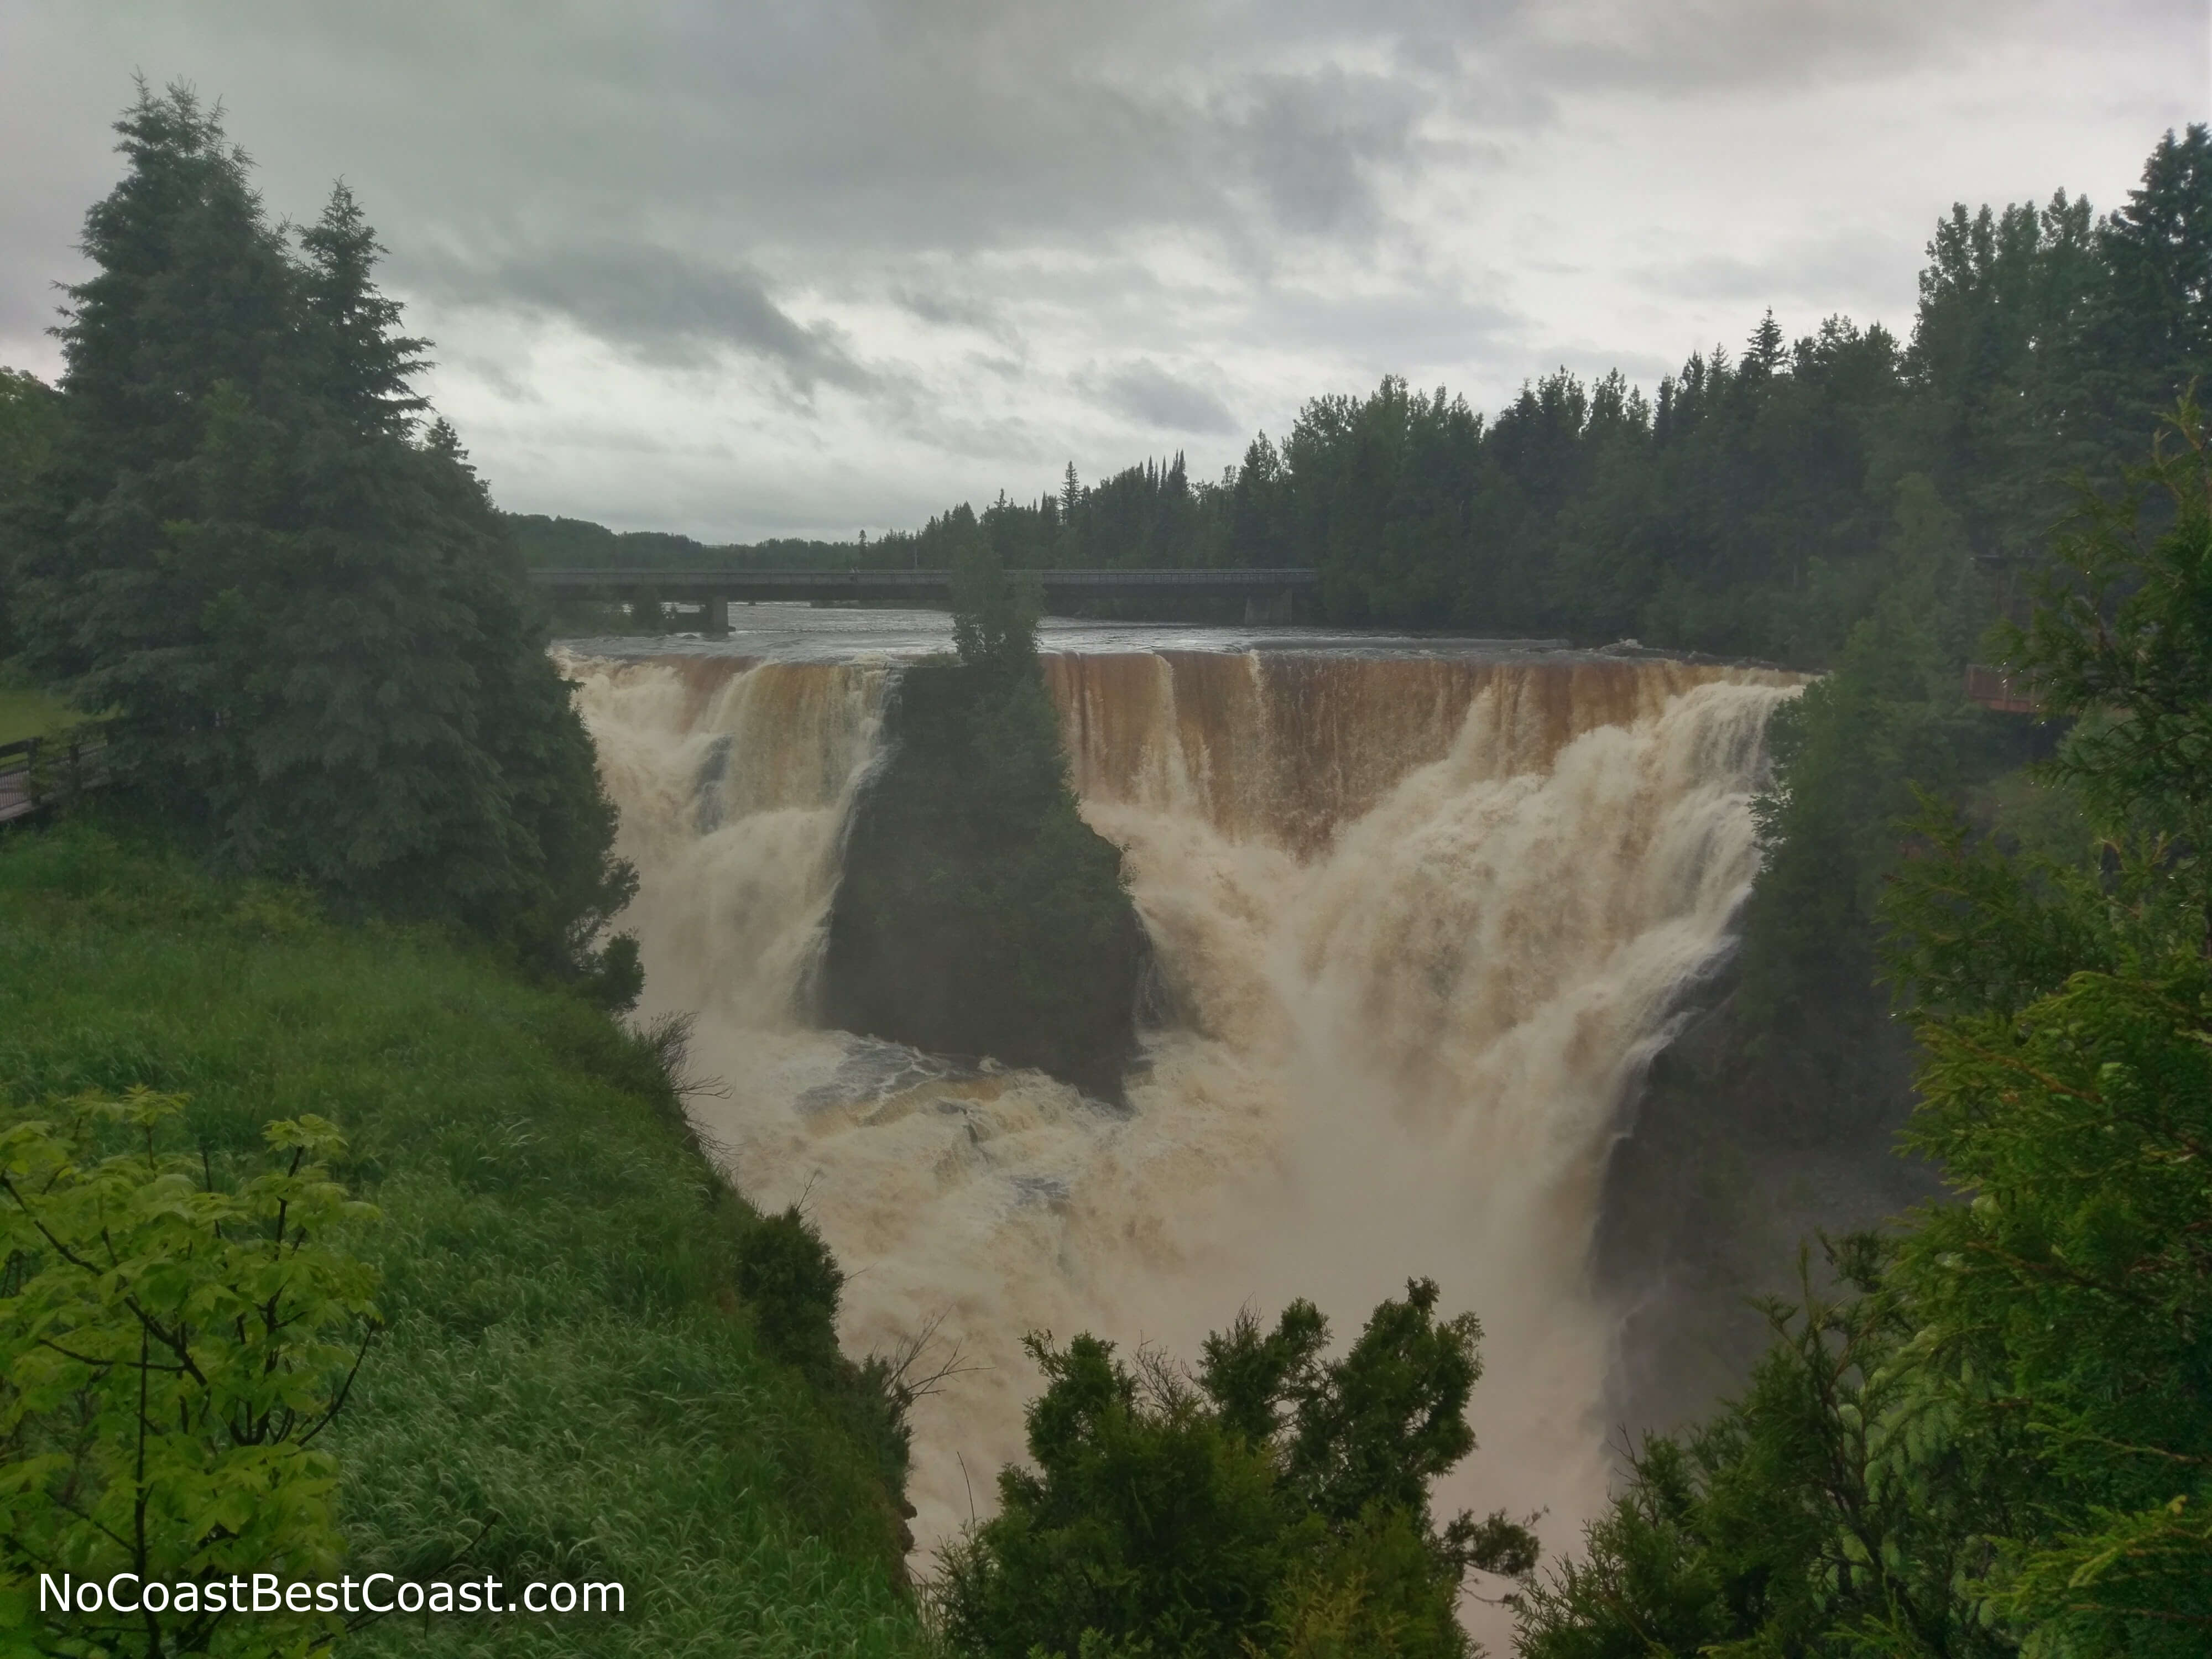 The second highest waterfall in Ontario: Kakabeka Falls